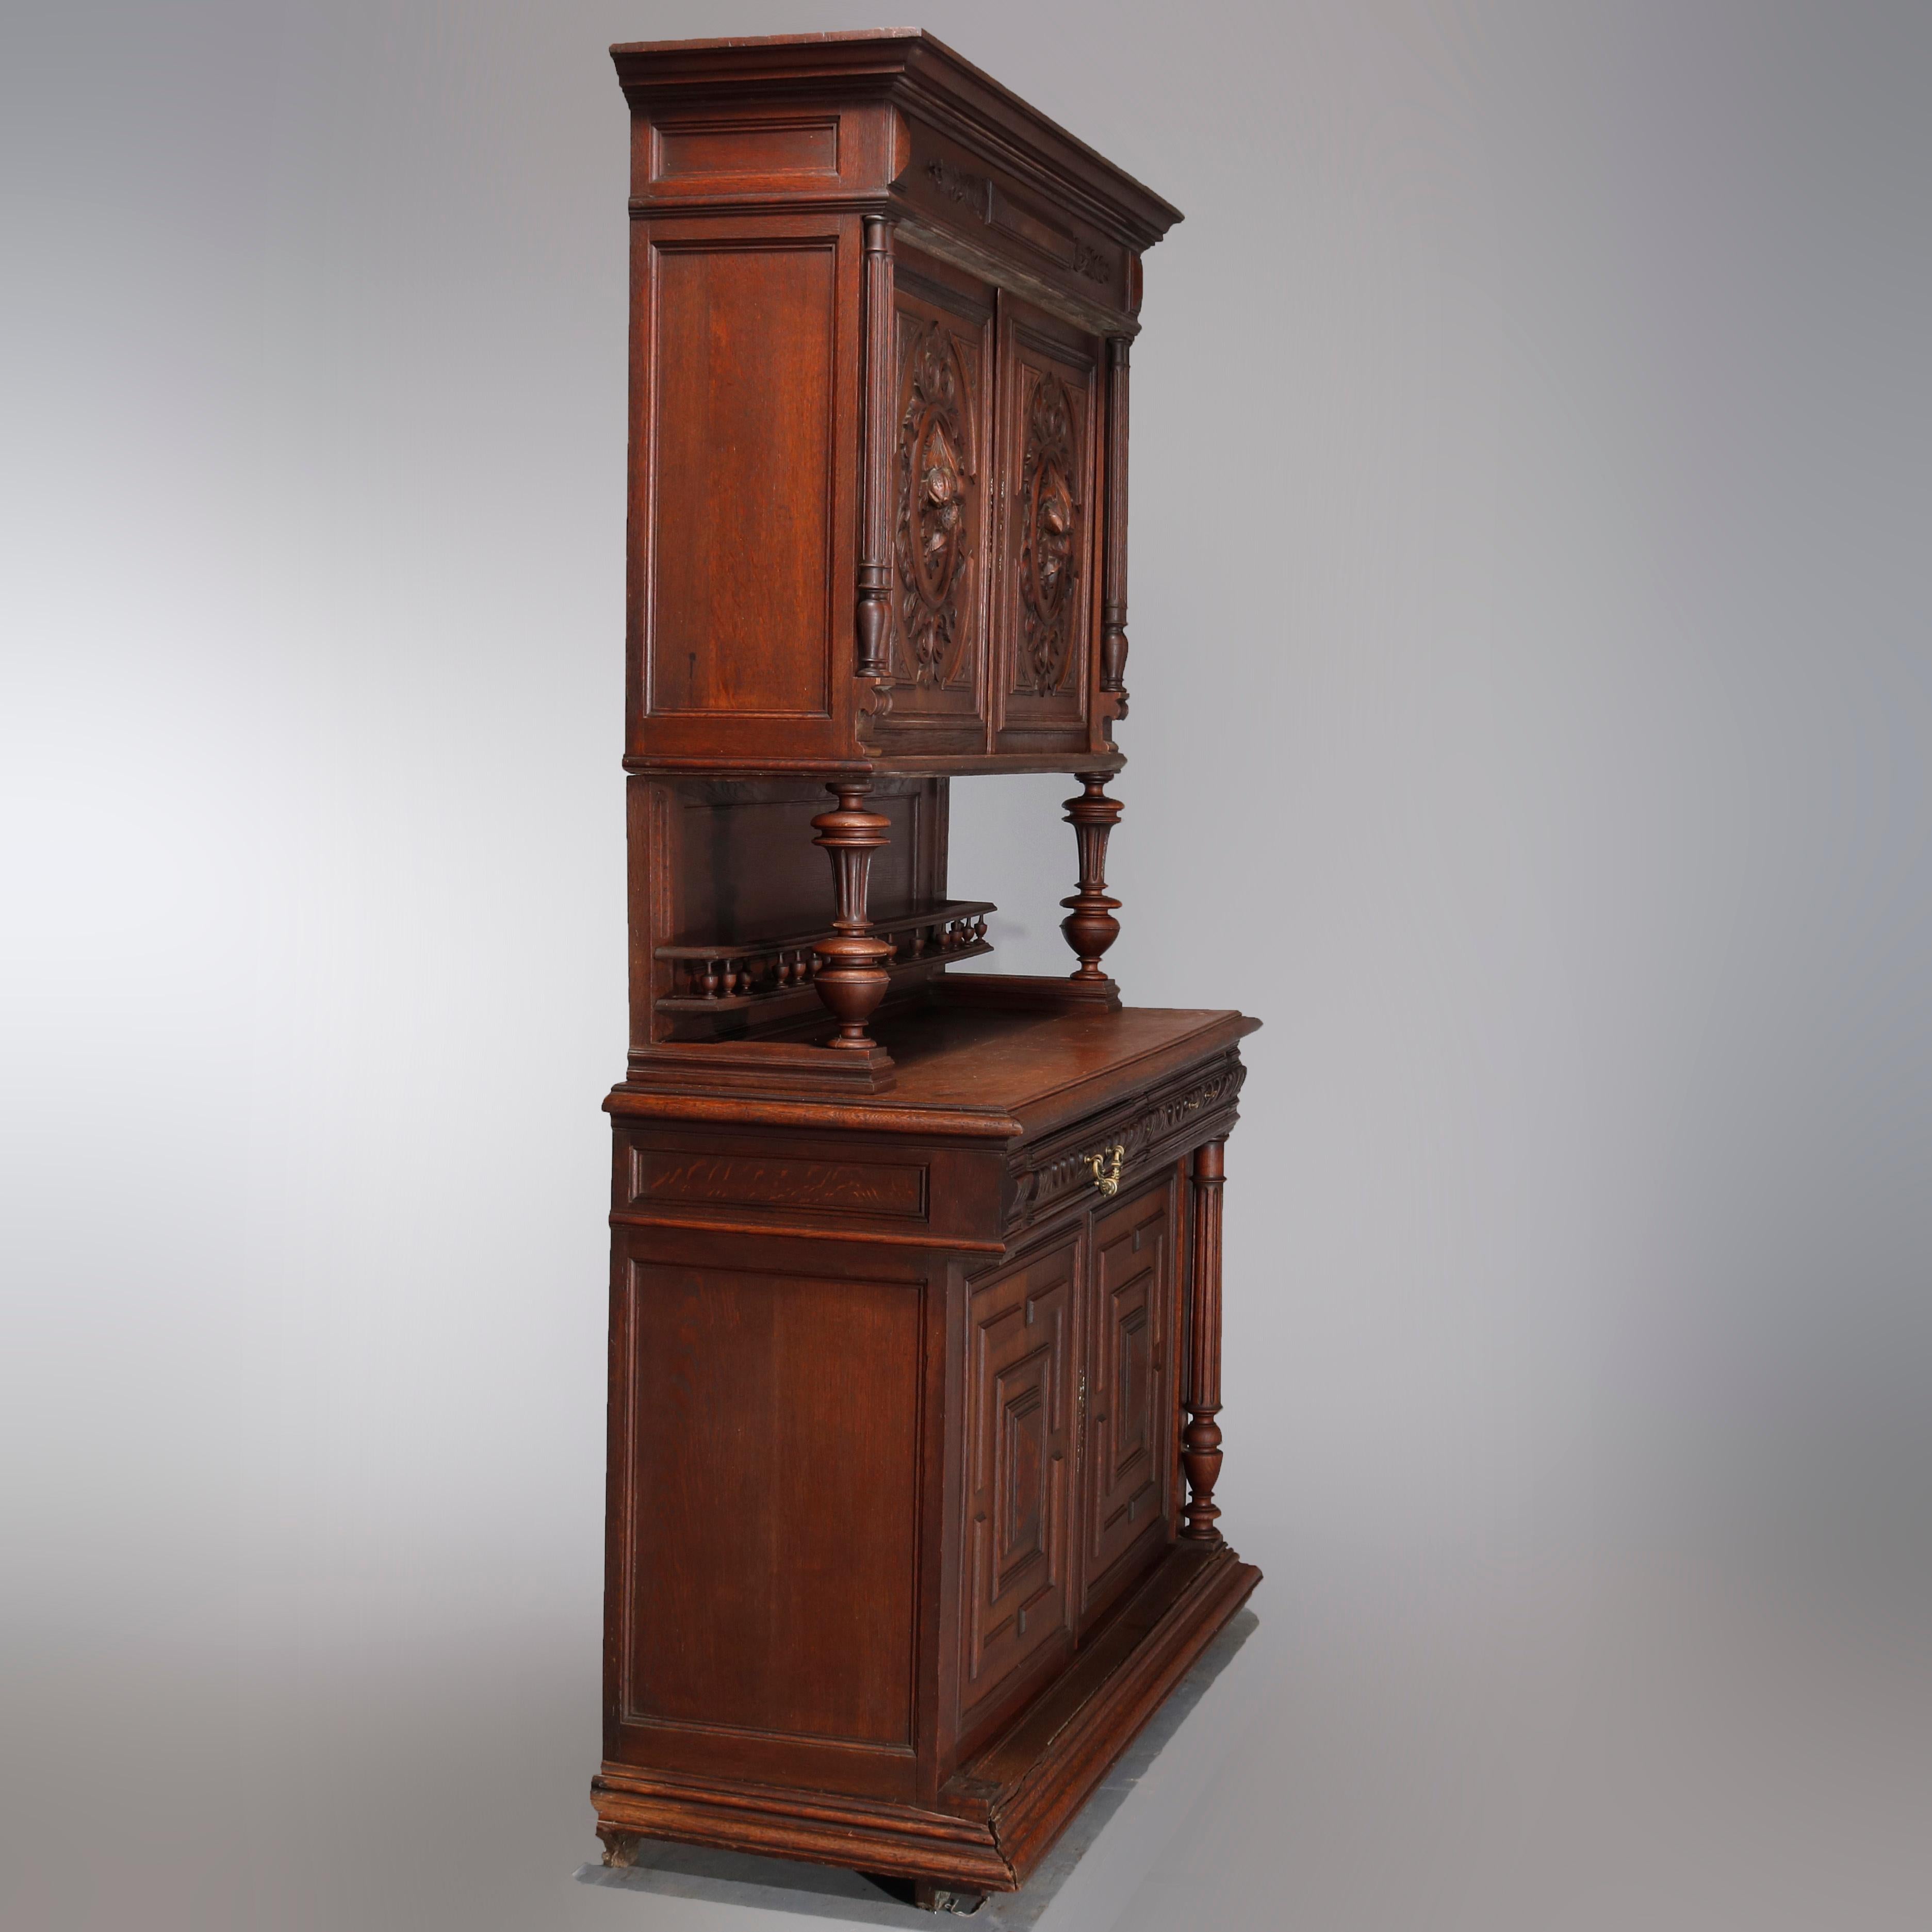 antique french furniture for sale